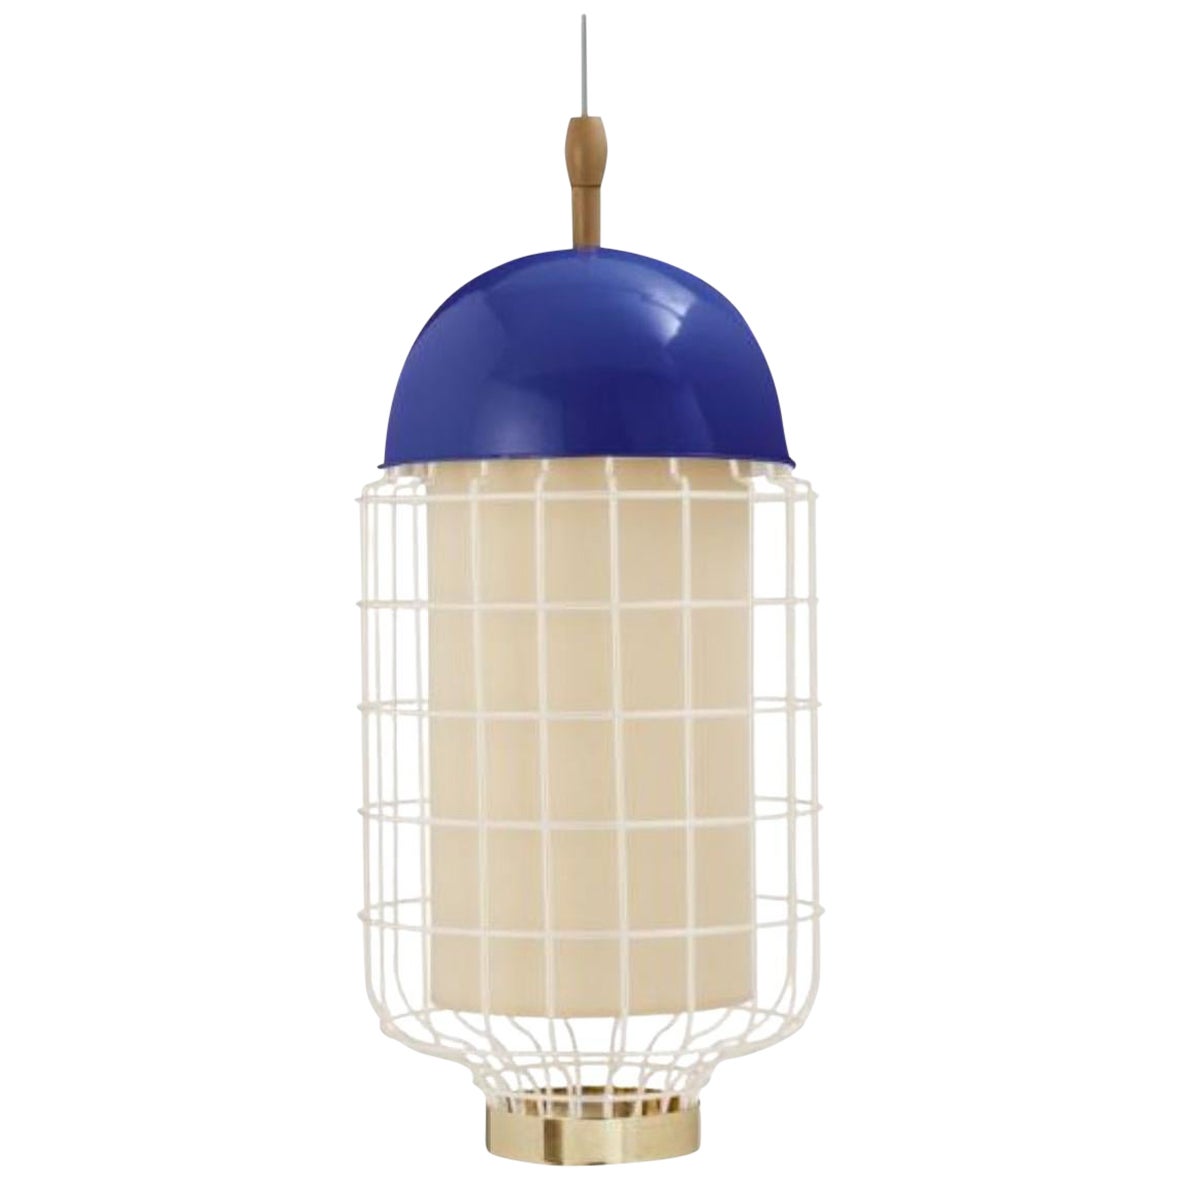 Cobalt Magnolia II Suspension Lamp with Brass Ring by Dooq